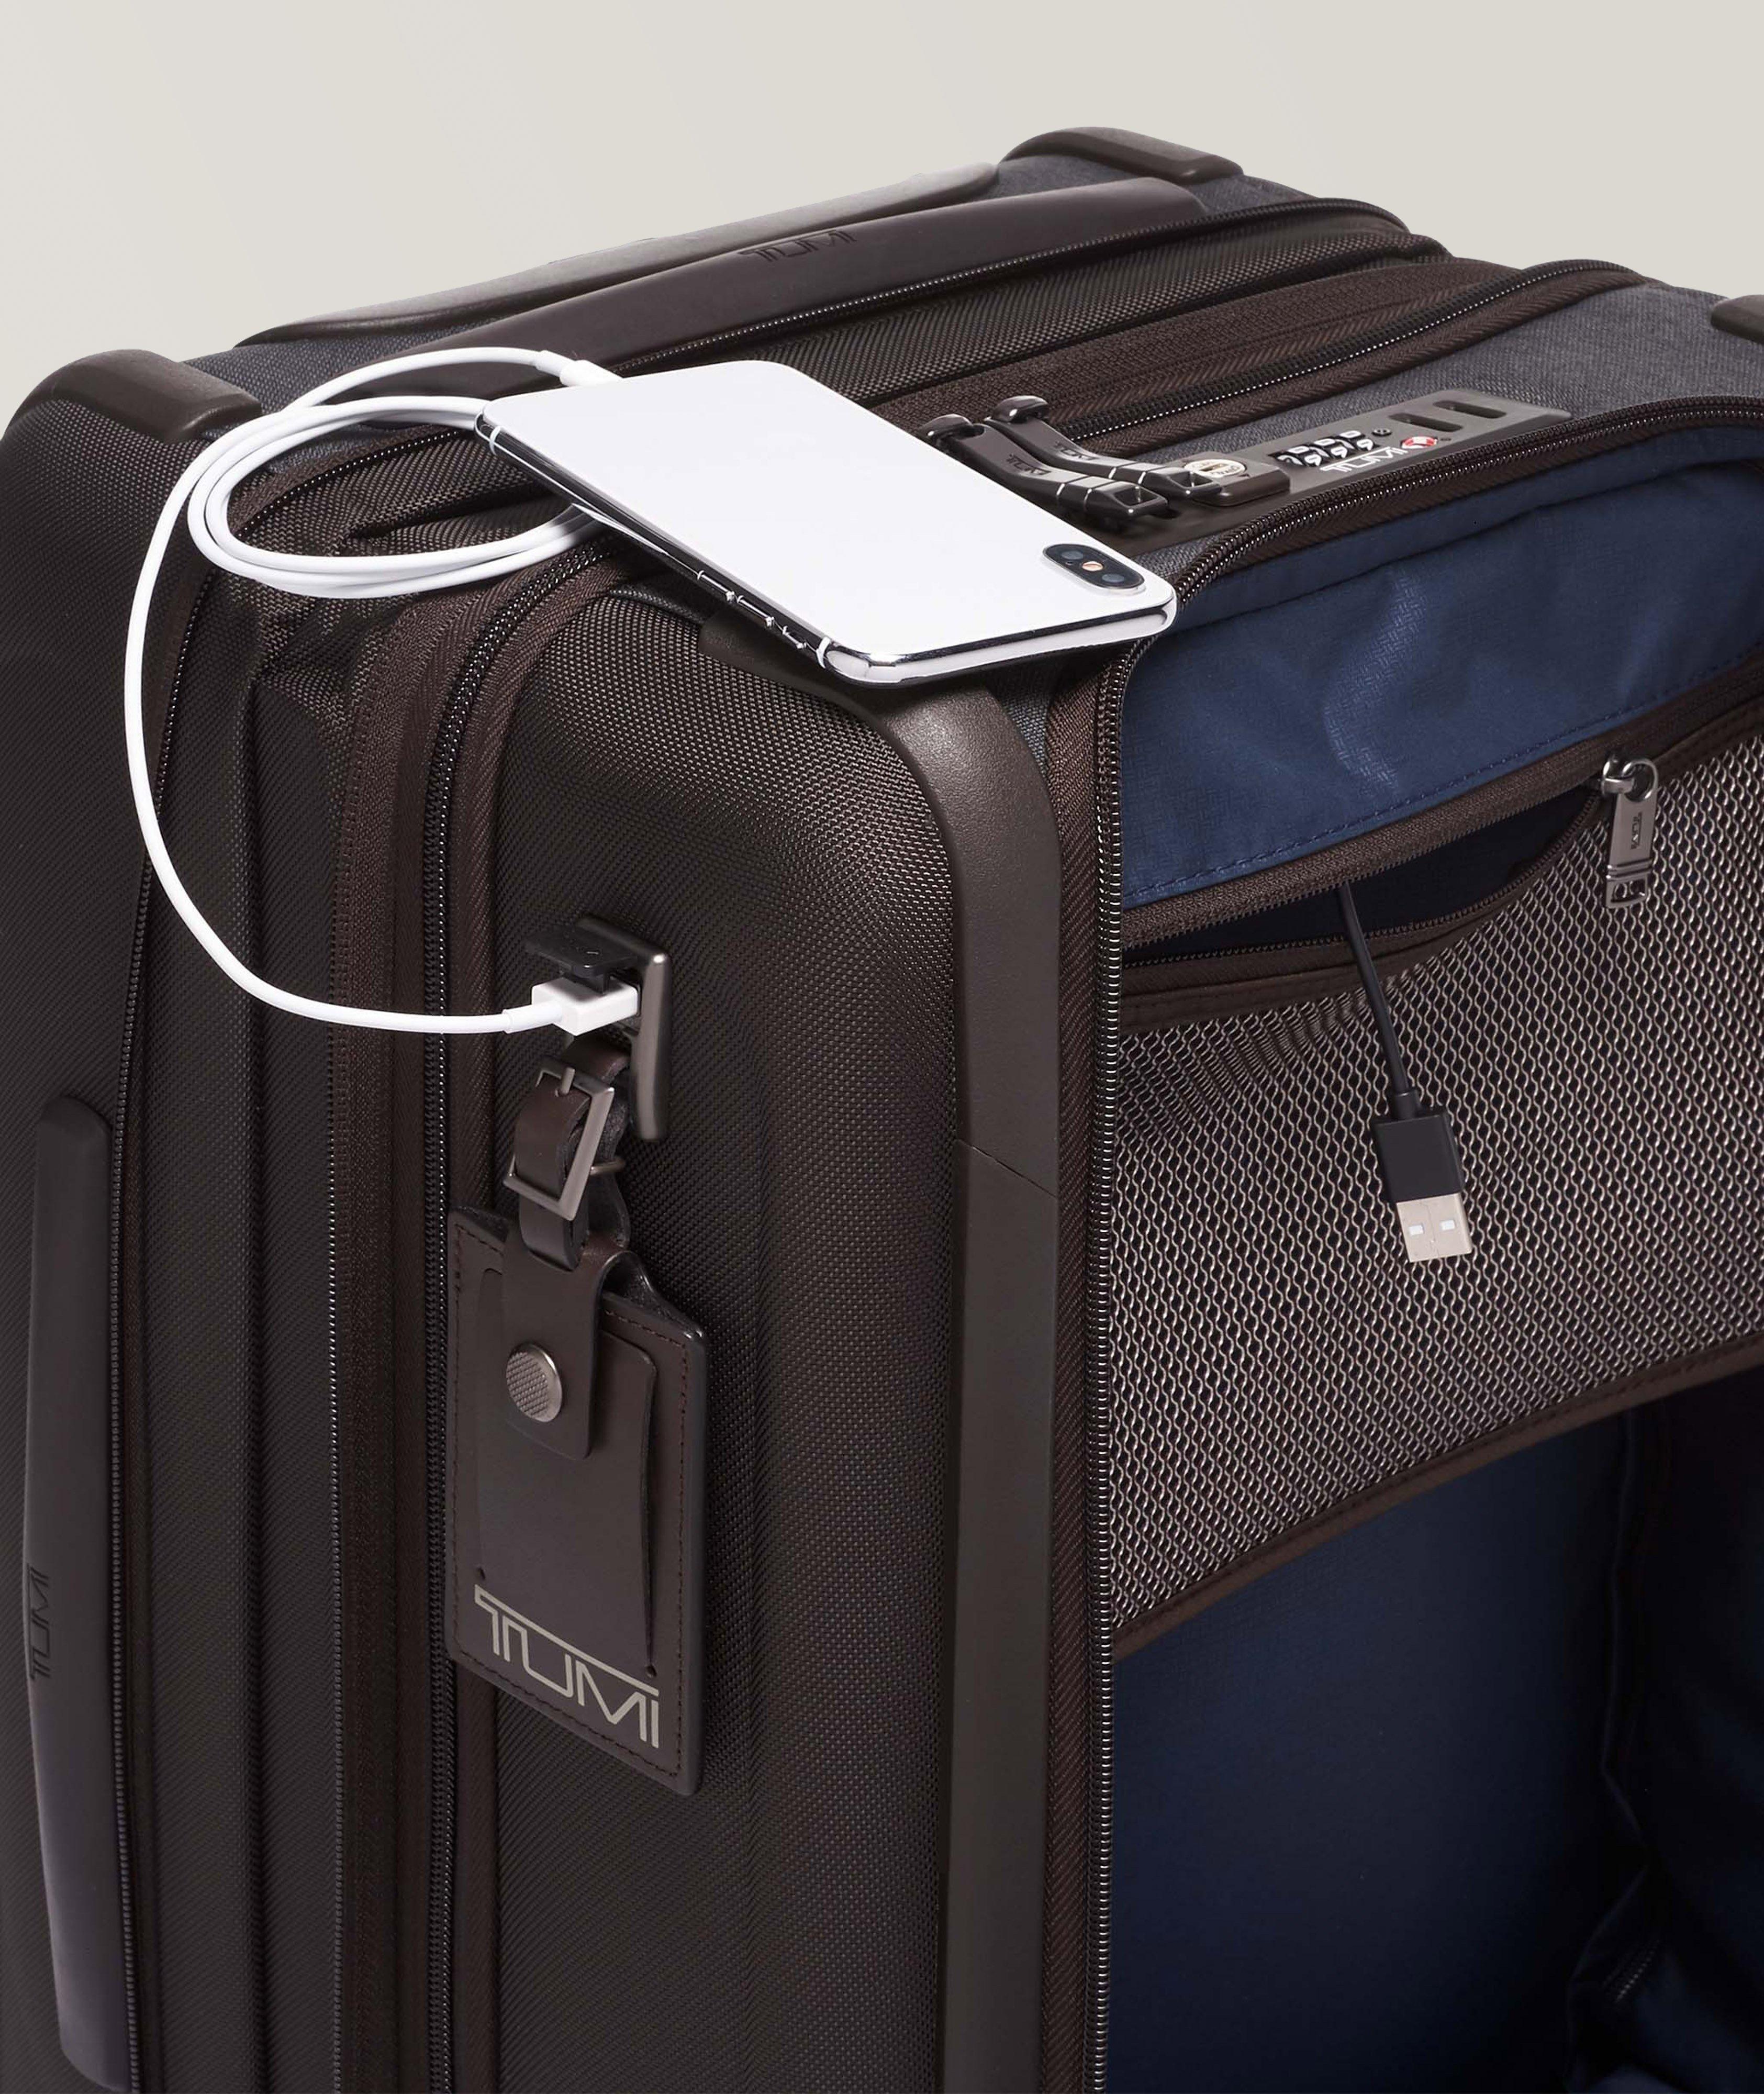 International Dual Access Expandable Carry On 